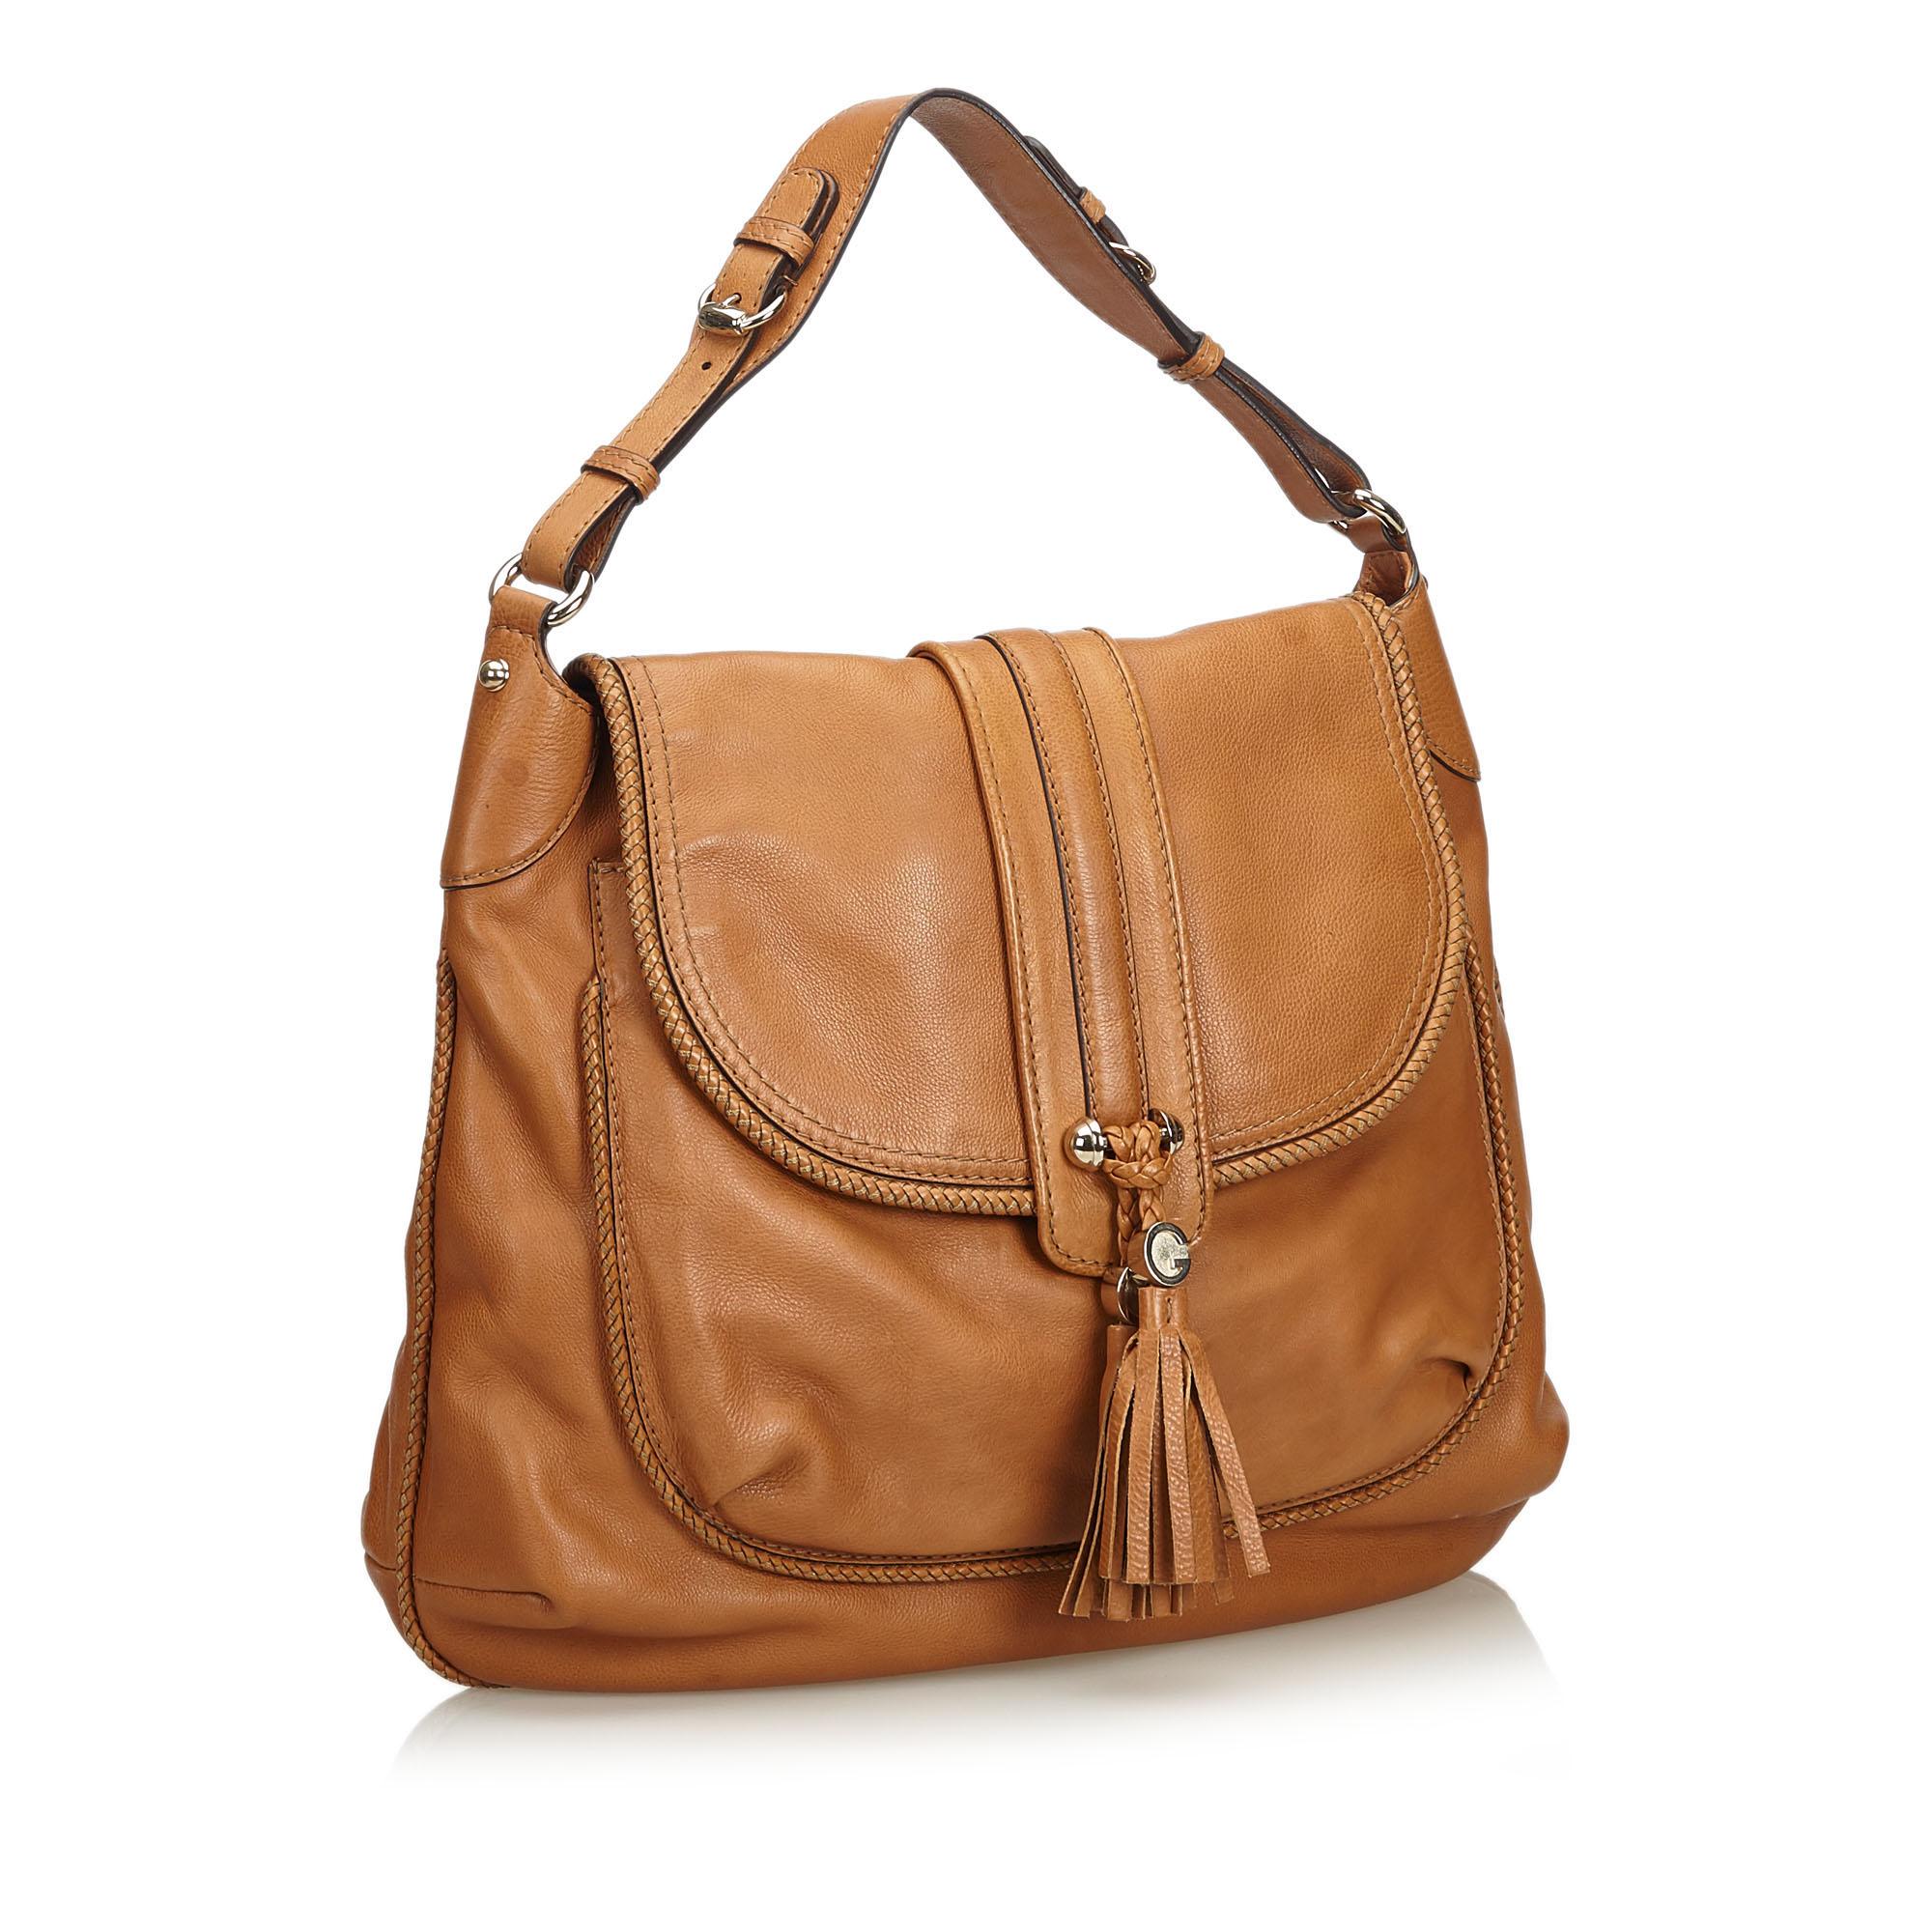 This shoulder bag features a leather body, a front exterior slip pocket, a flat leather strap, a front flap with tassel details, an open top, and interior zip pockets. It carries as B+ condition rating.

Inclusions: 
Dust Bag

Dimensions:
Length: